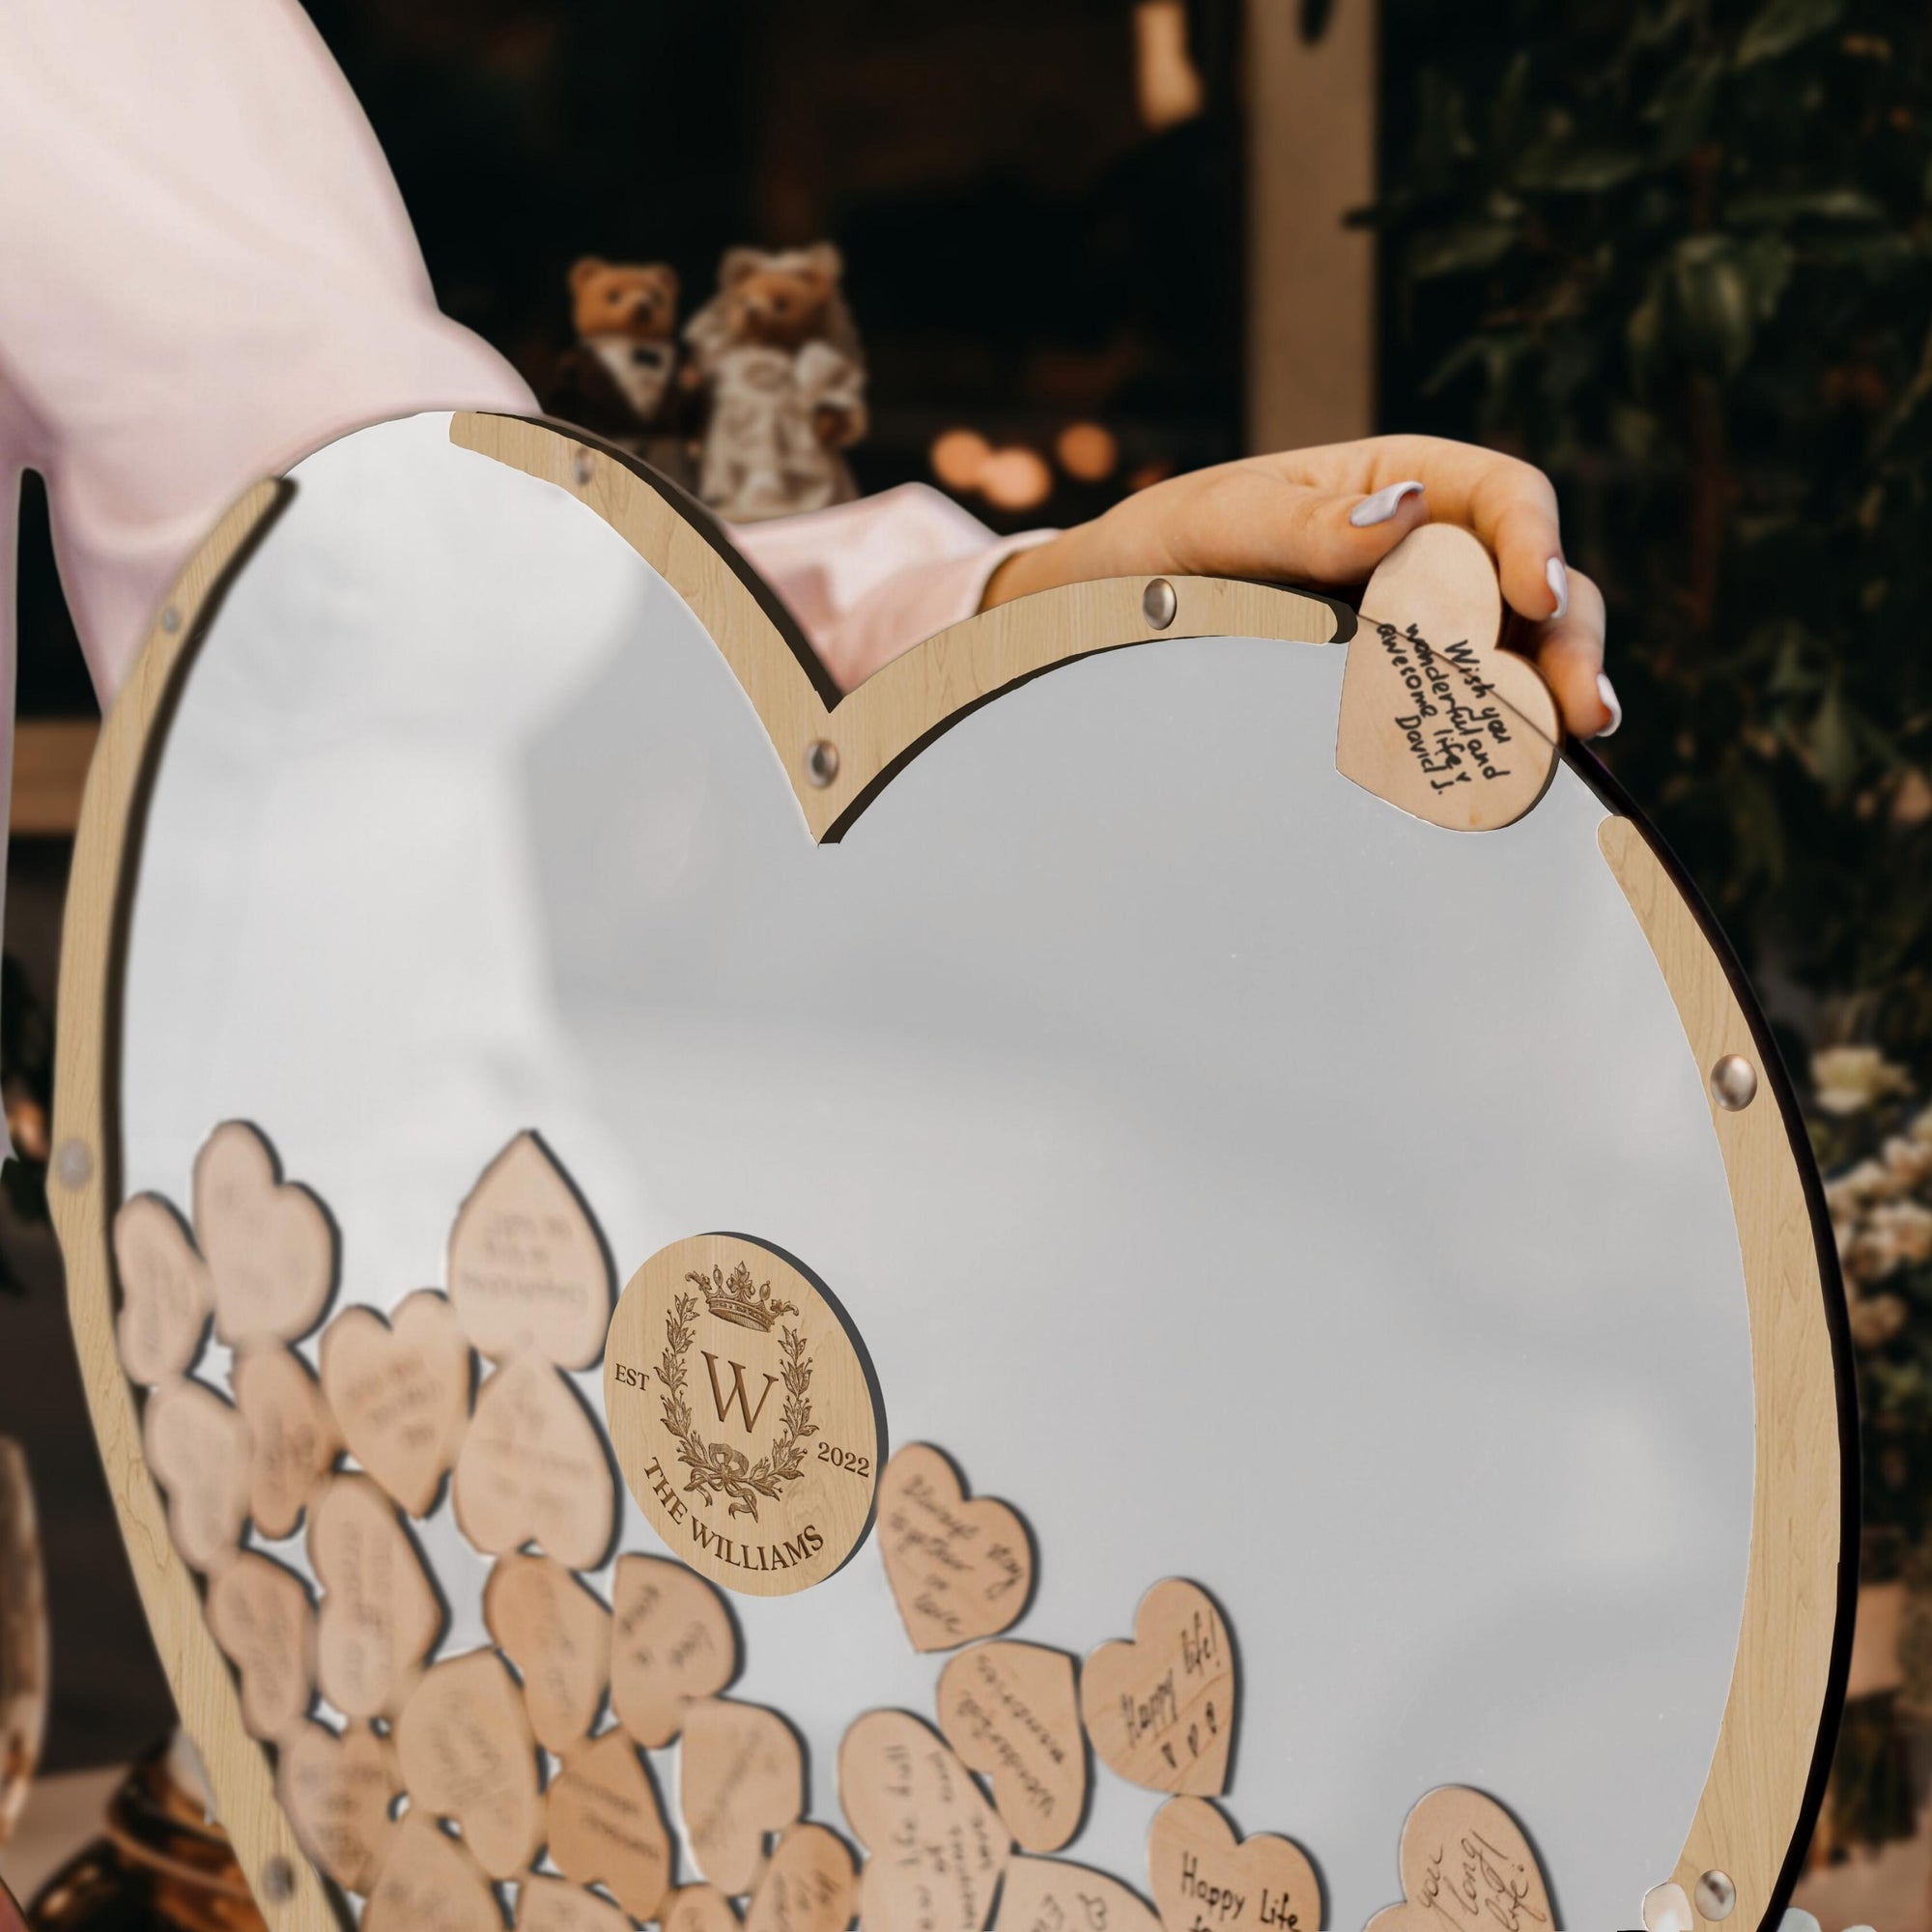 Custom Made Laser Cut Plywood Heart Shape Wedding Drop Box, Rustic Personalised Name &amp; Date Guest Book Alternative, Stationery Table Decor